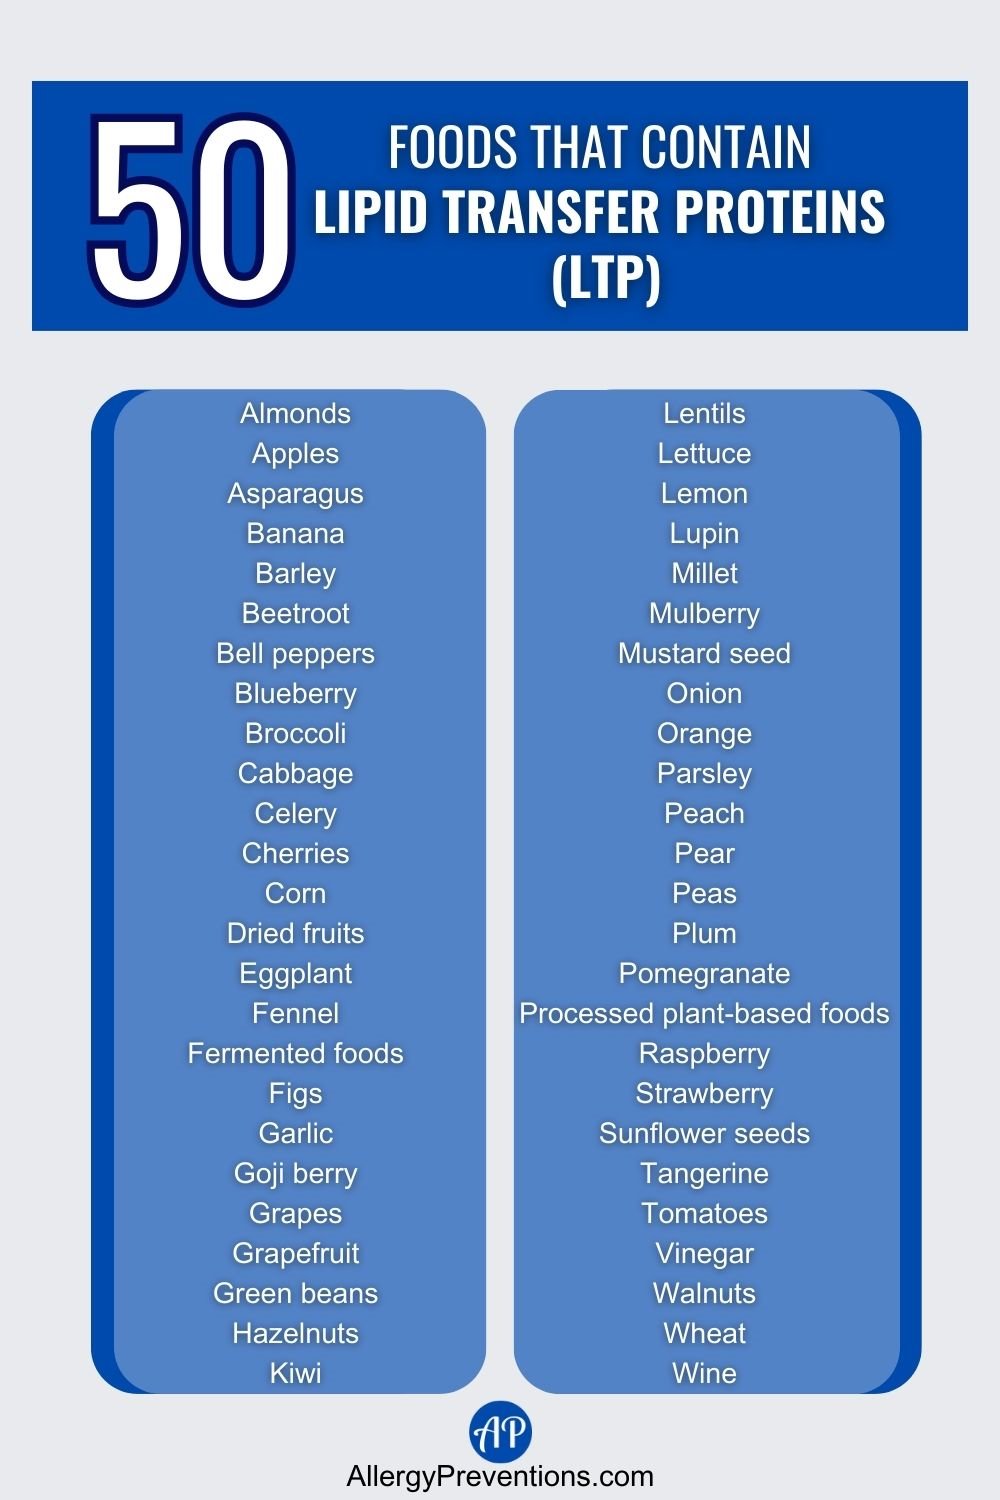 foods that contain lipid Transfer Proteins (LTP) infographic: Almonds, Apples, Asparagus, Banana, Barley, Beetroot, Bell peppers, Blueberry, Broccoli, Cabbage, Celery, Cherries, Corn, Dried fruits, Eggplant, Fennel, Fermented foods, Figs, Garlic, Goji berry, Grapes, Grapefruit, Green beans, Hazelnuts, Kiwi, Lentils, Lettuce, Lemon, Lupin, Millet, Mulberry, Mustard seed, Onion, Orange, Parsley, Peach, Pear, Peas, Plum, Pomegranate, Processed plant-based foods, Raspberry, Strawberry, Sunflower seeds, Tangerine, Tomatoes, Vinegar, Walnuts, Wheat, and Wine.